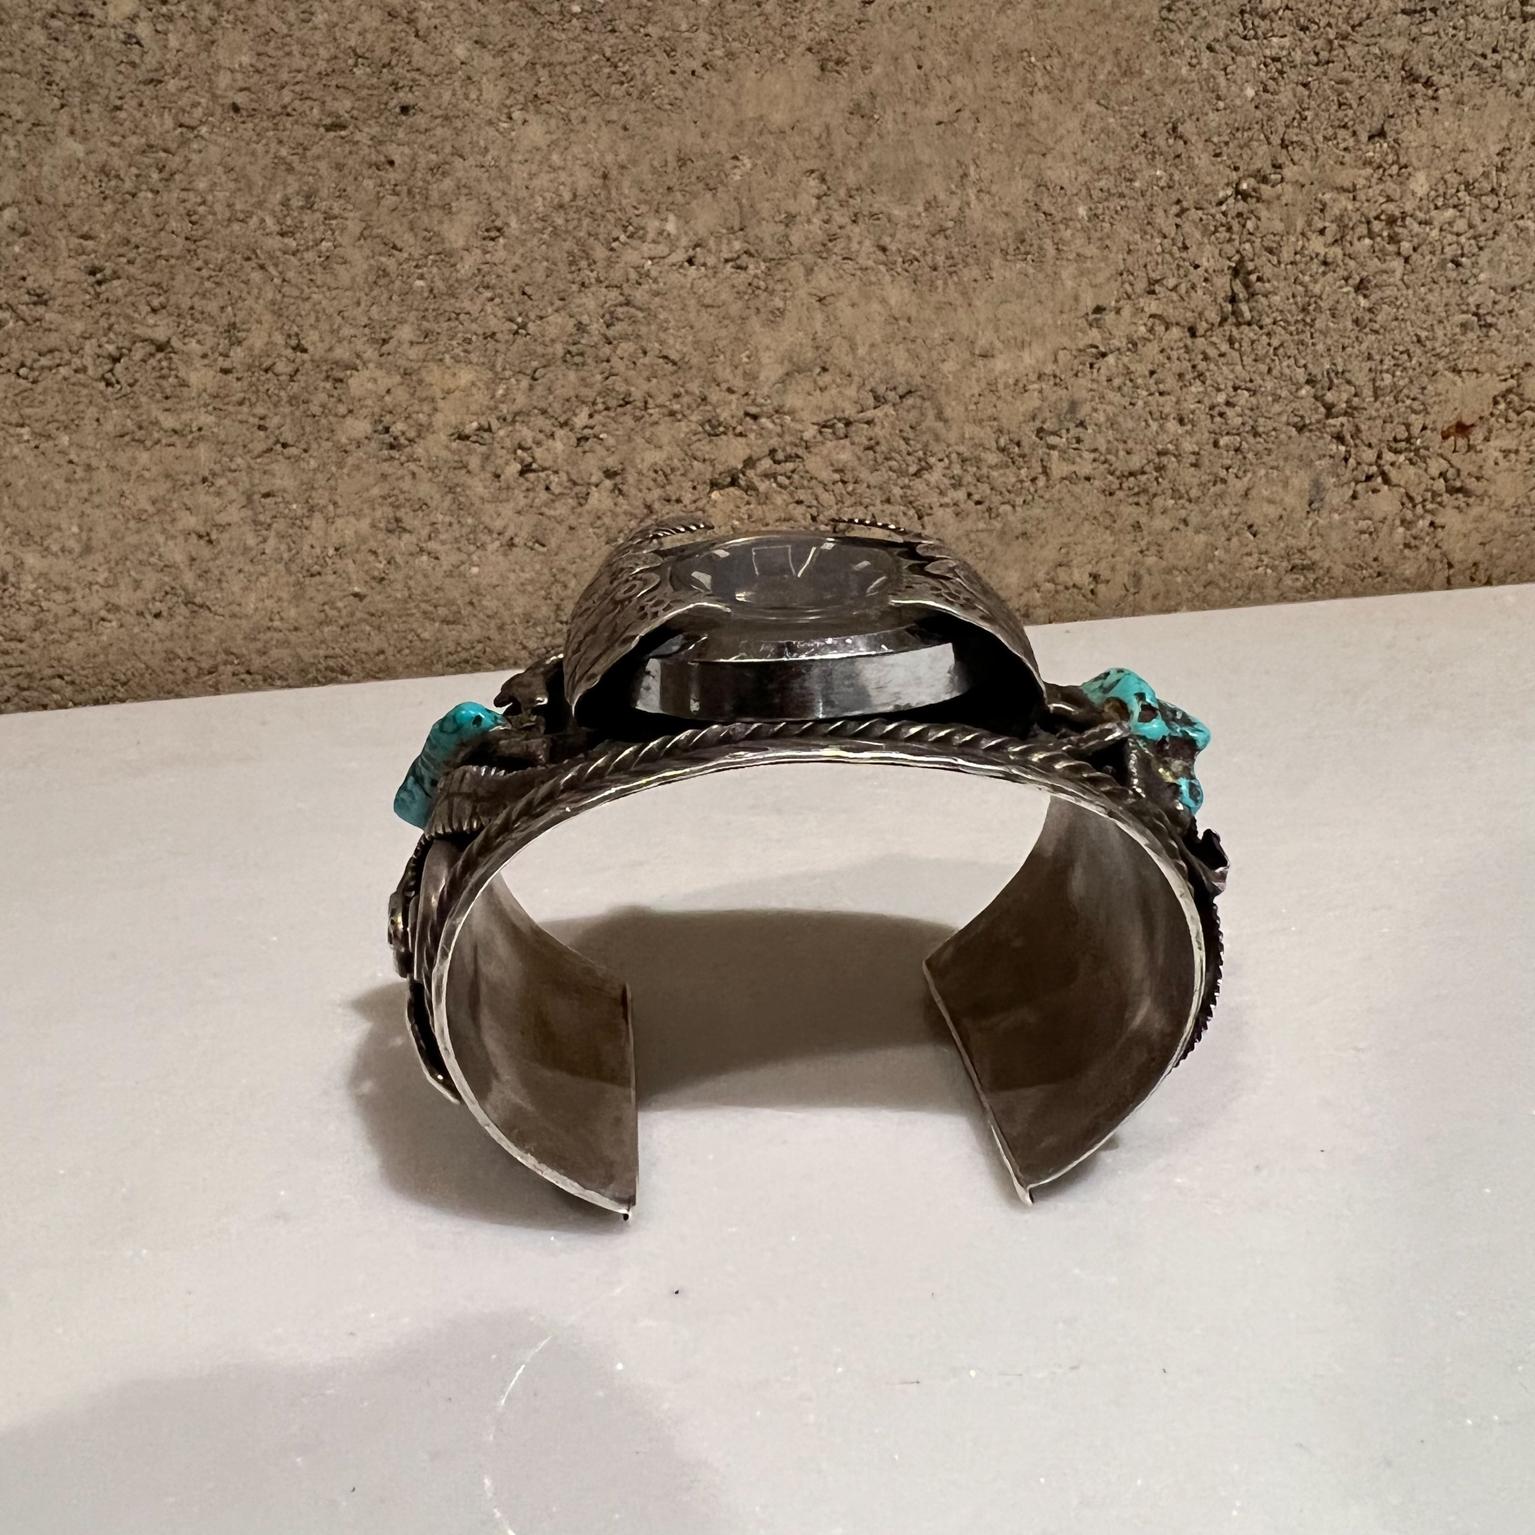 1970s Navajo Southwestern Silver and Stone Decorative Cuff Bracelet Watch Band For Sale 9